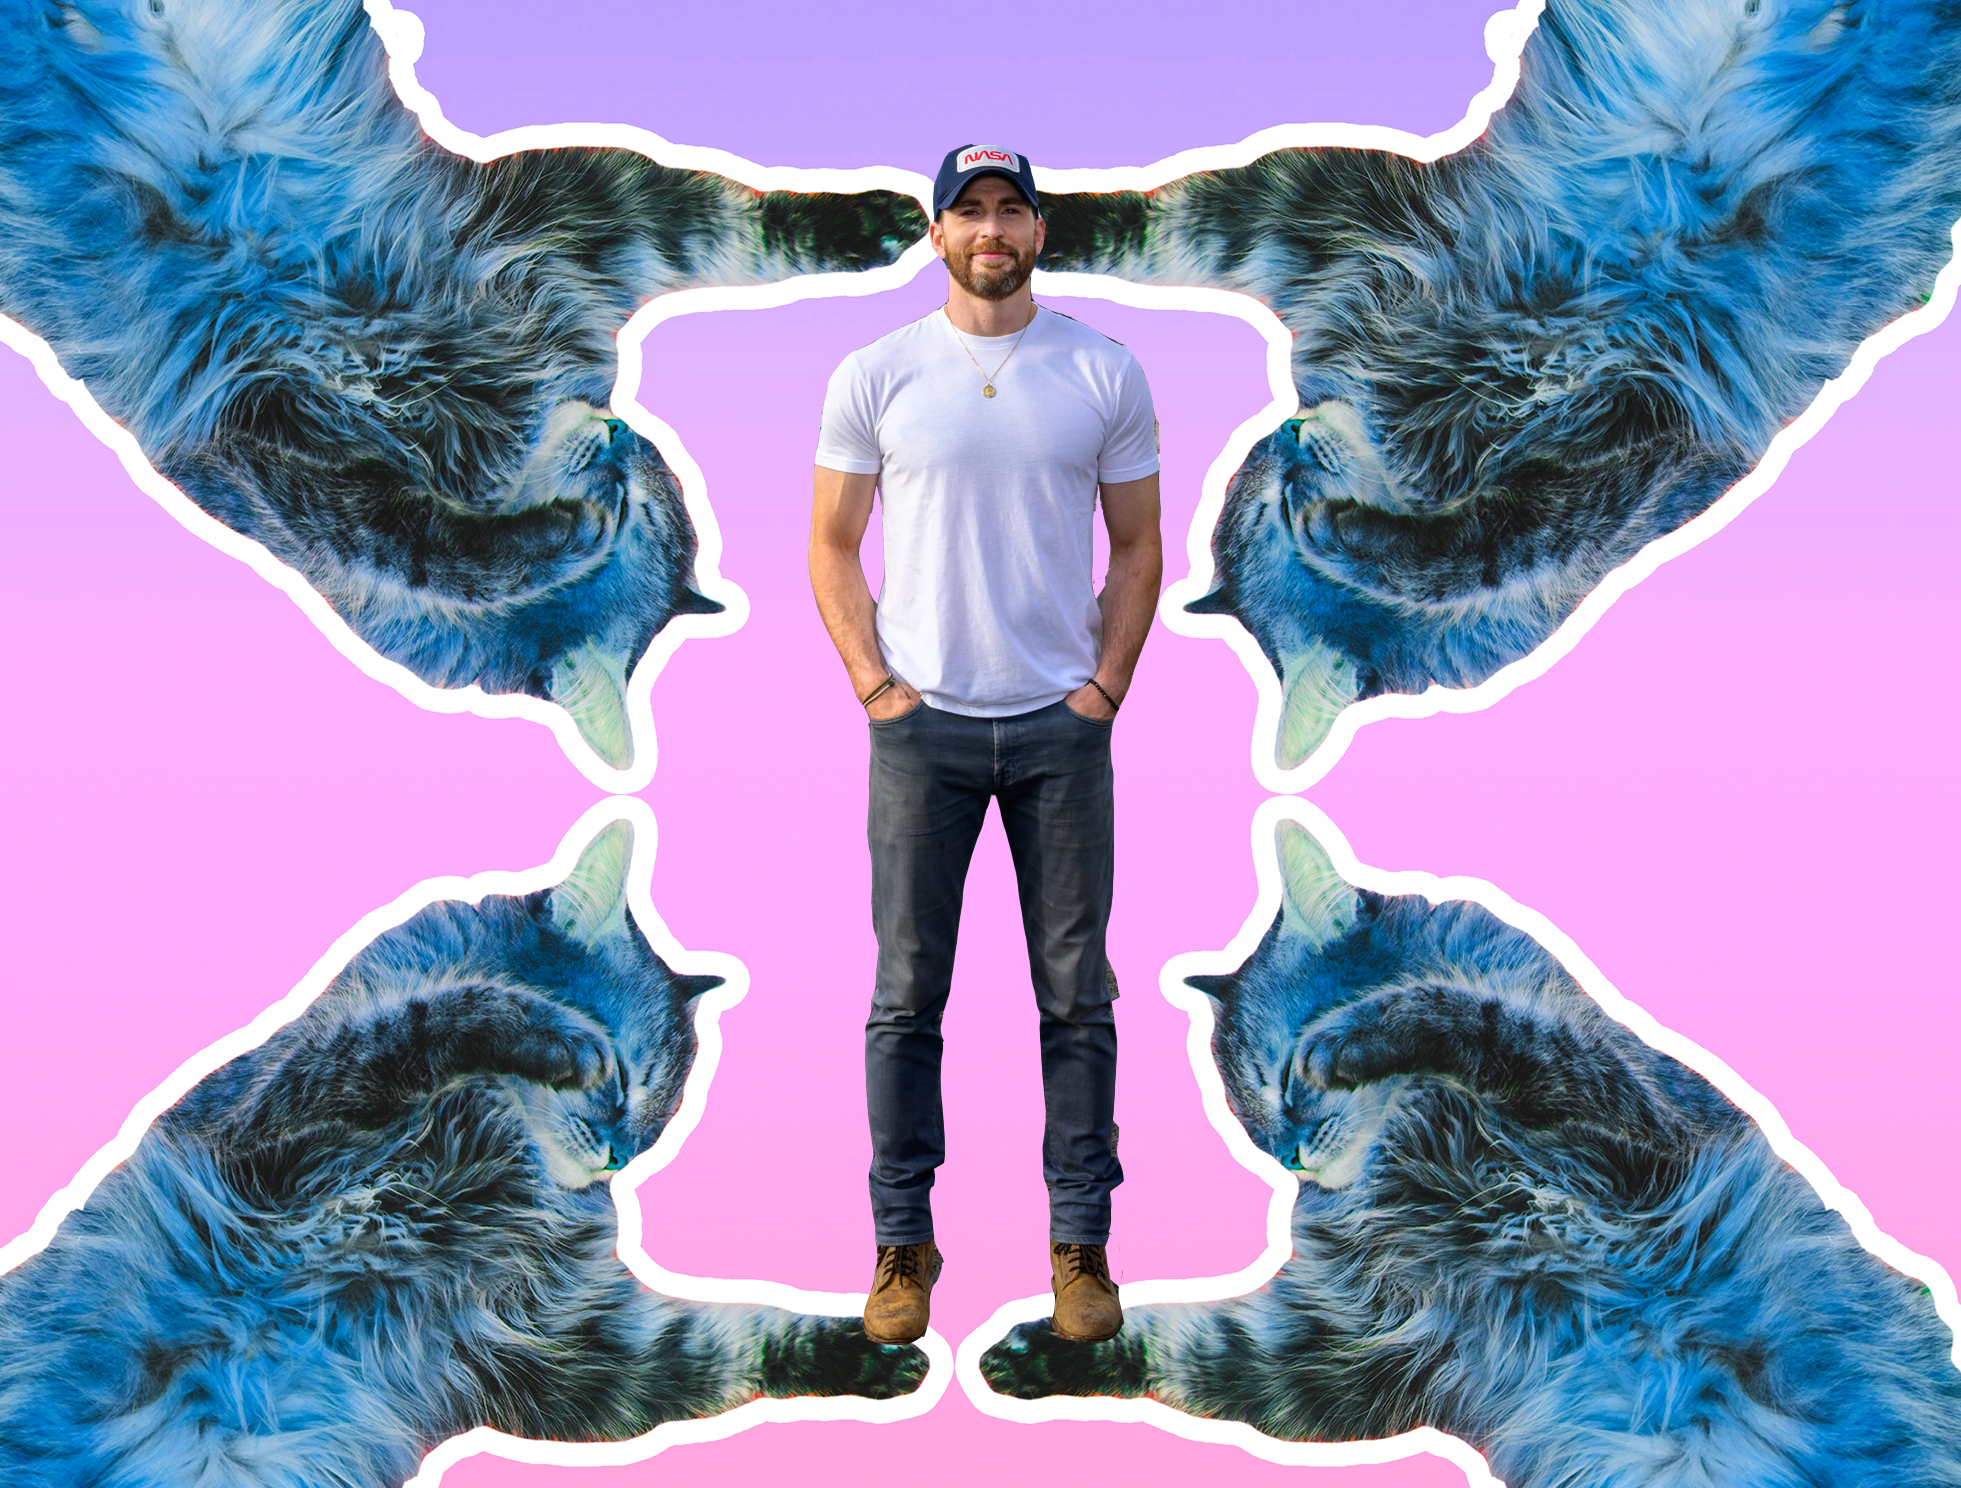 chris photoshopped with large cats as the background